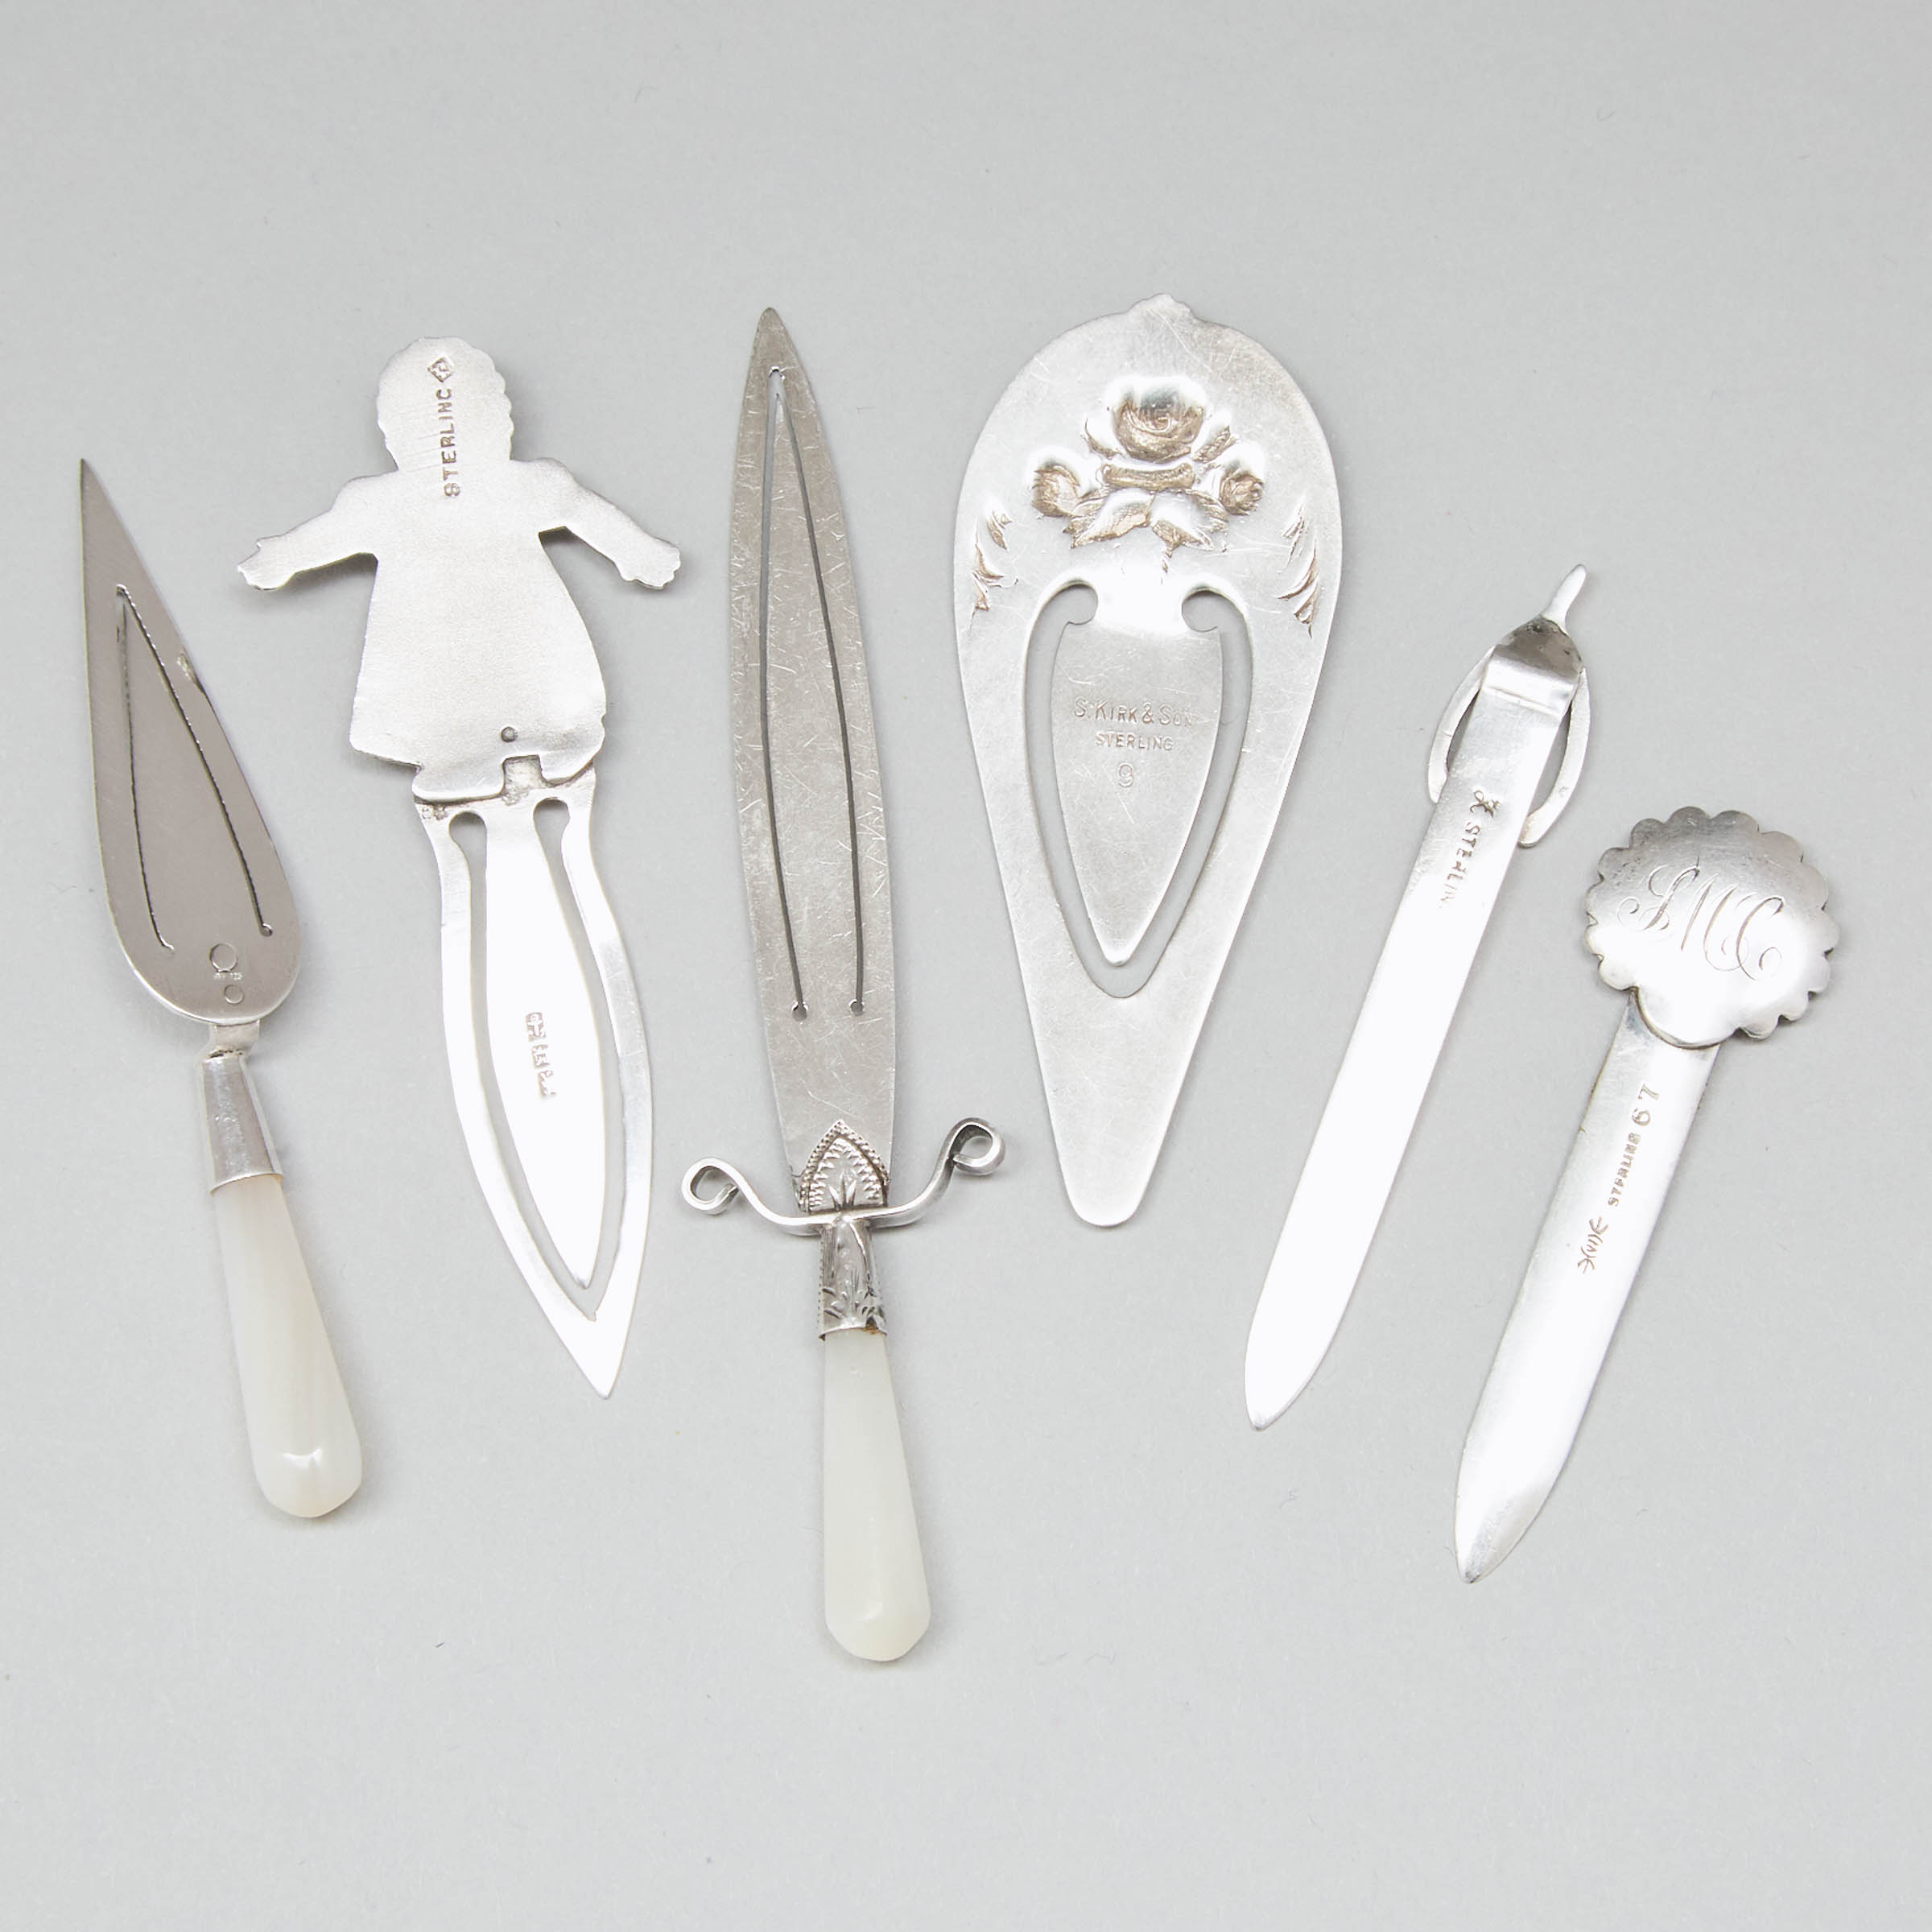 Six Mainly North American Silver Bookmarks, early 20th century